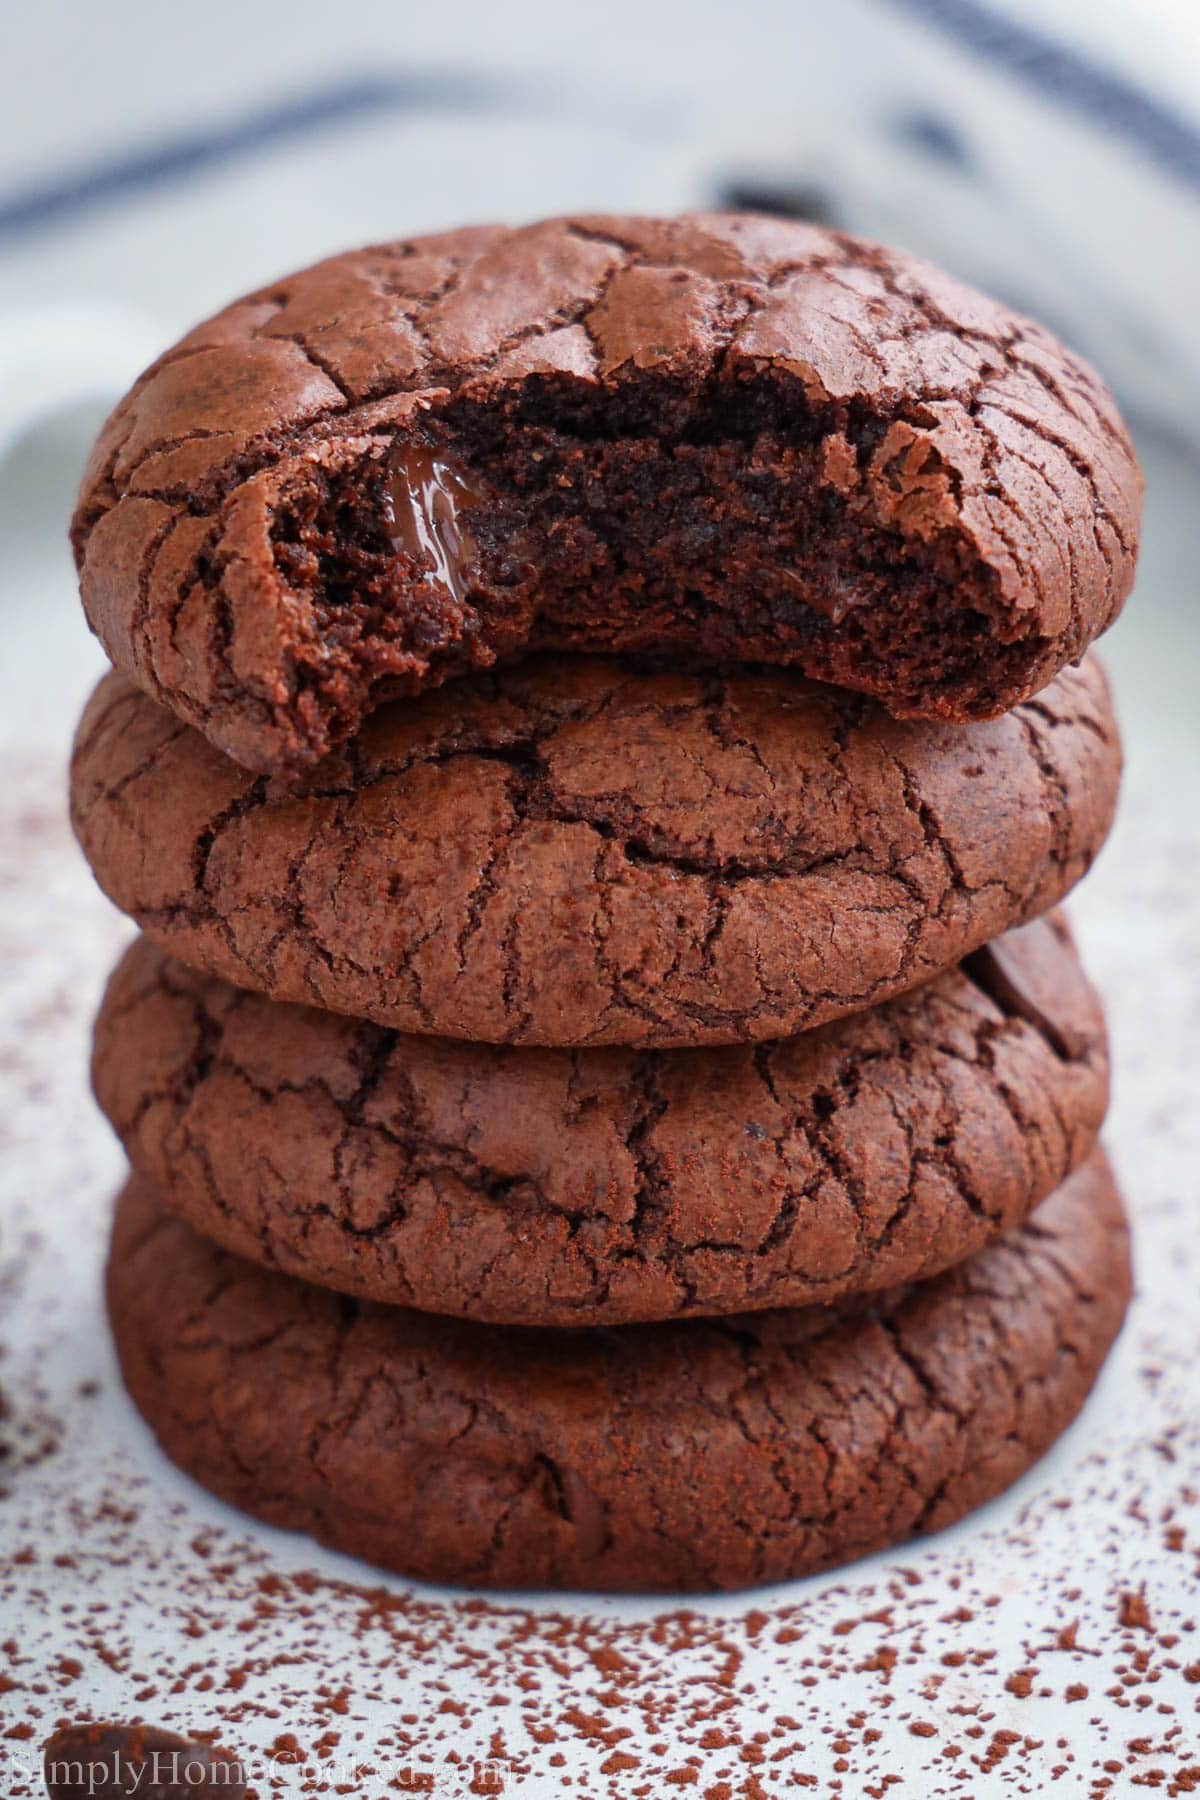 Stack of Brownie Cookies, the top one missing a bite.